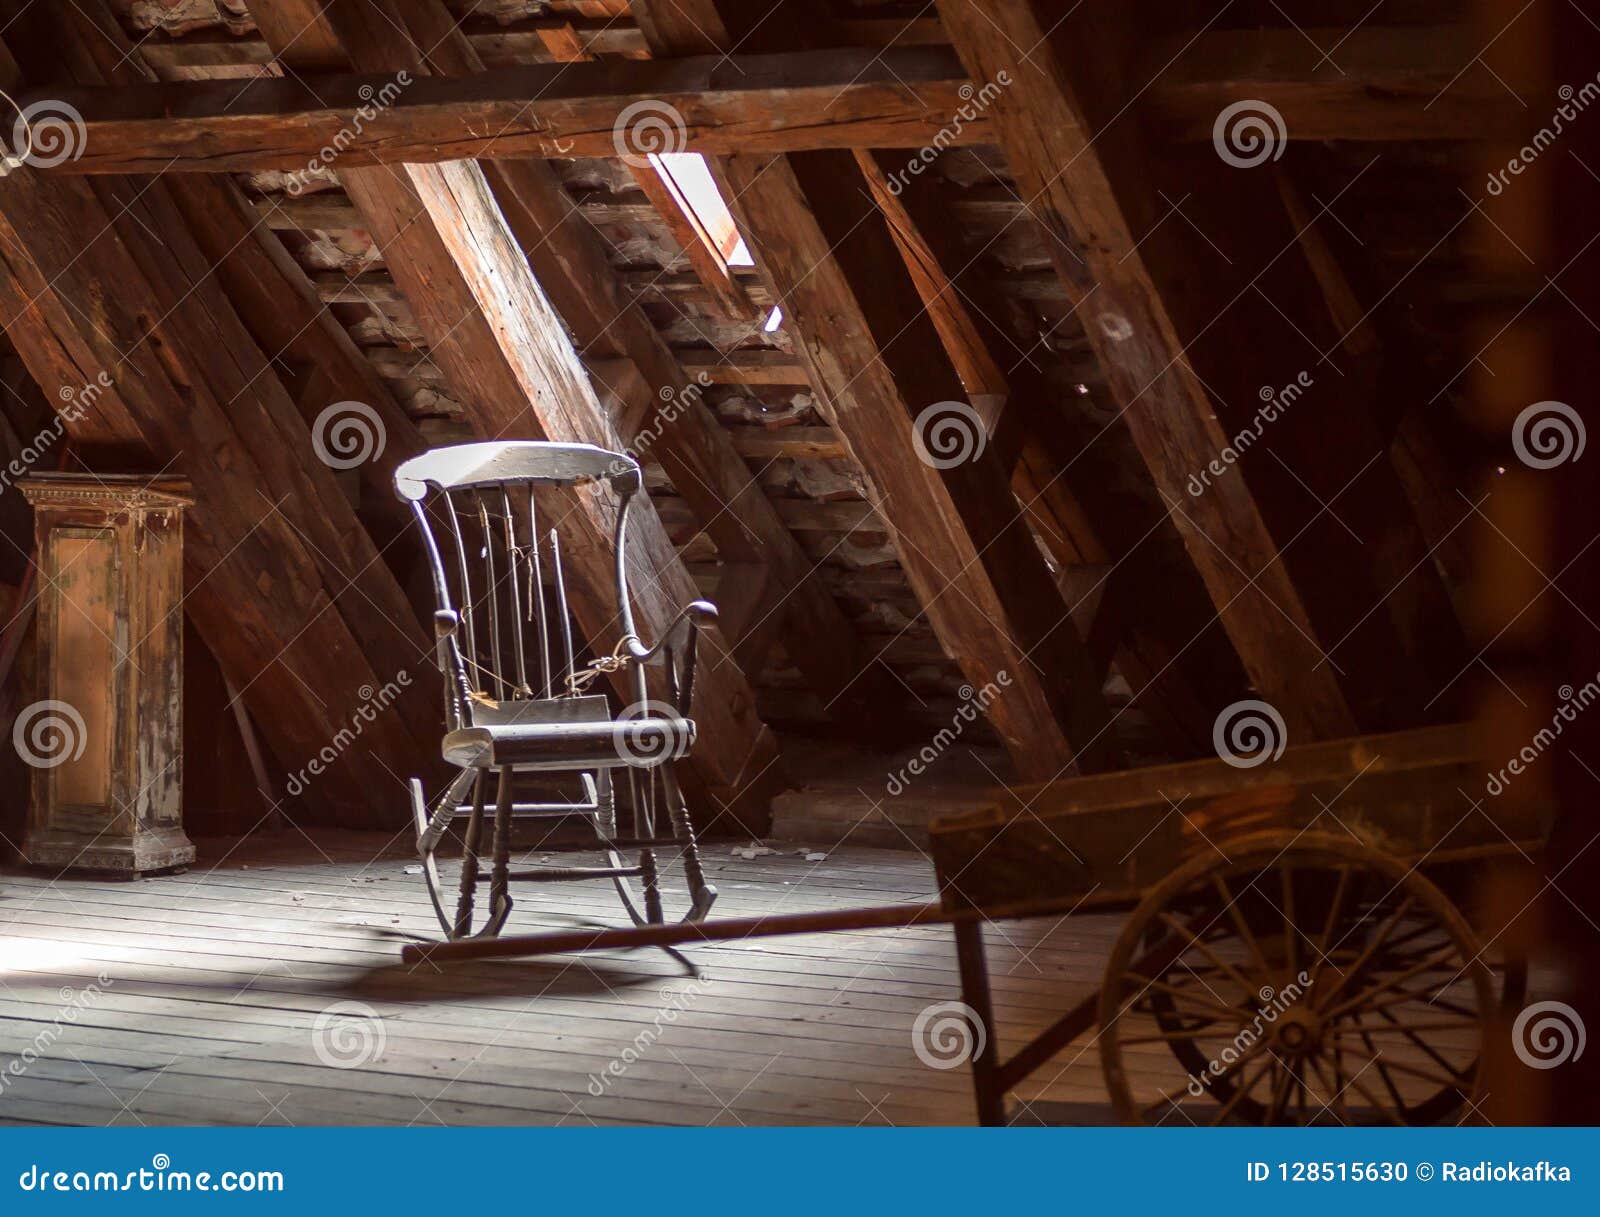 Old House Attic With Retro Furniture Wooden Rocking Chair